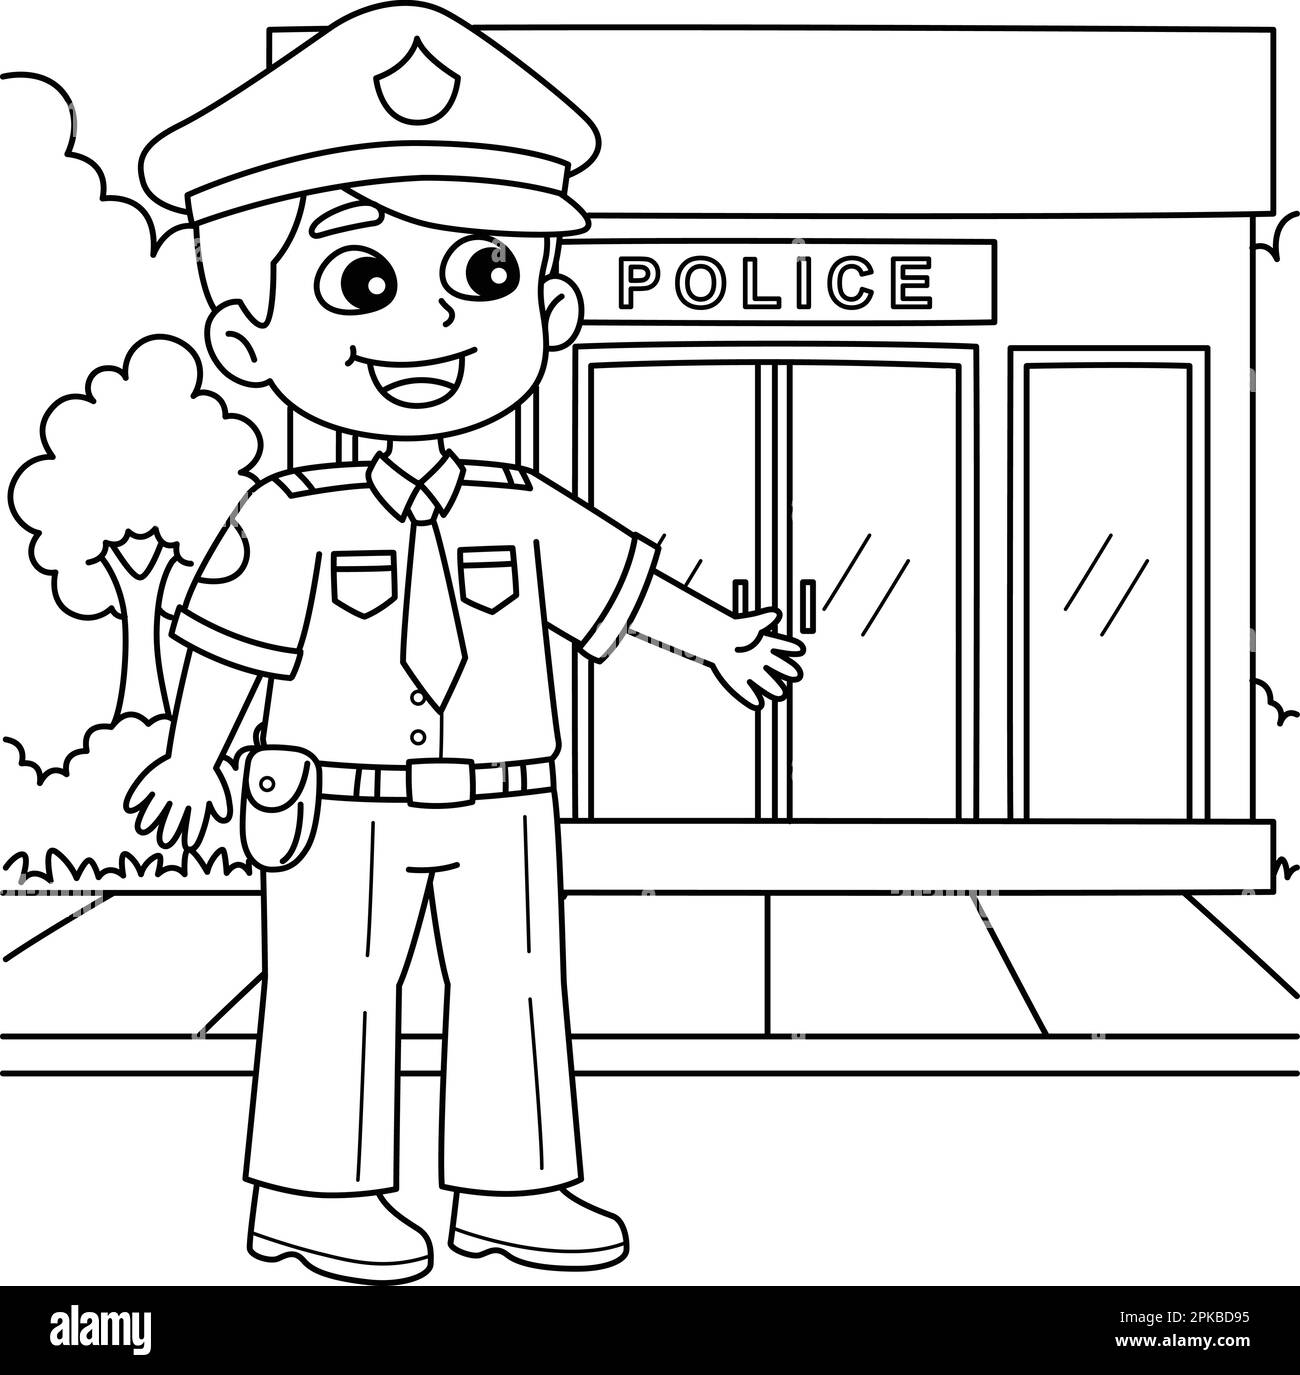 Police station coloring page for kids Royalty Free Vector